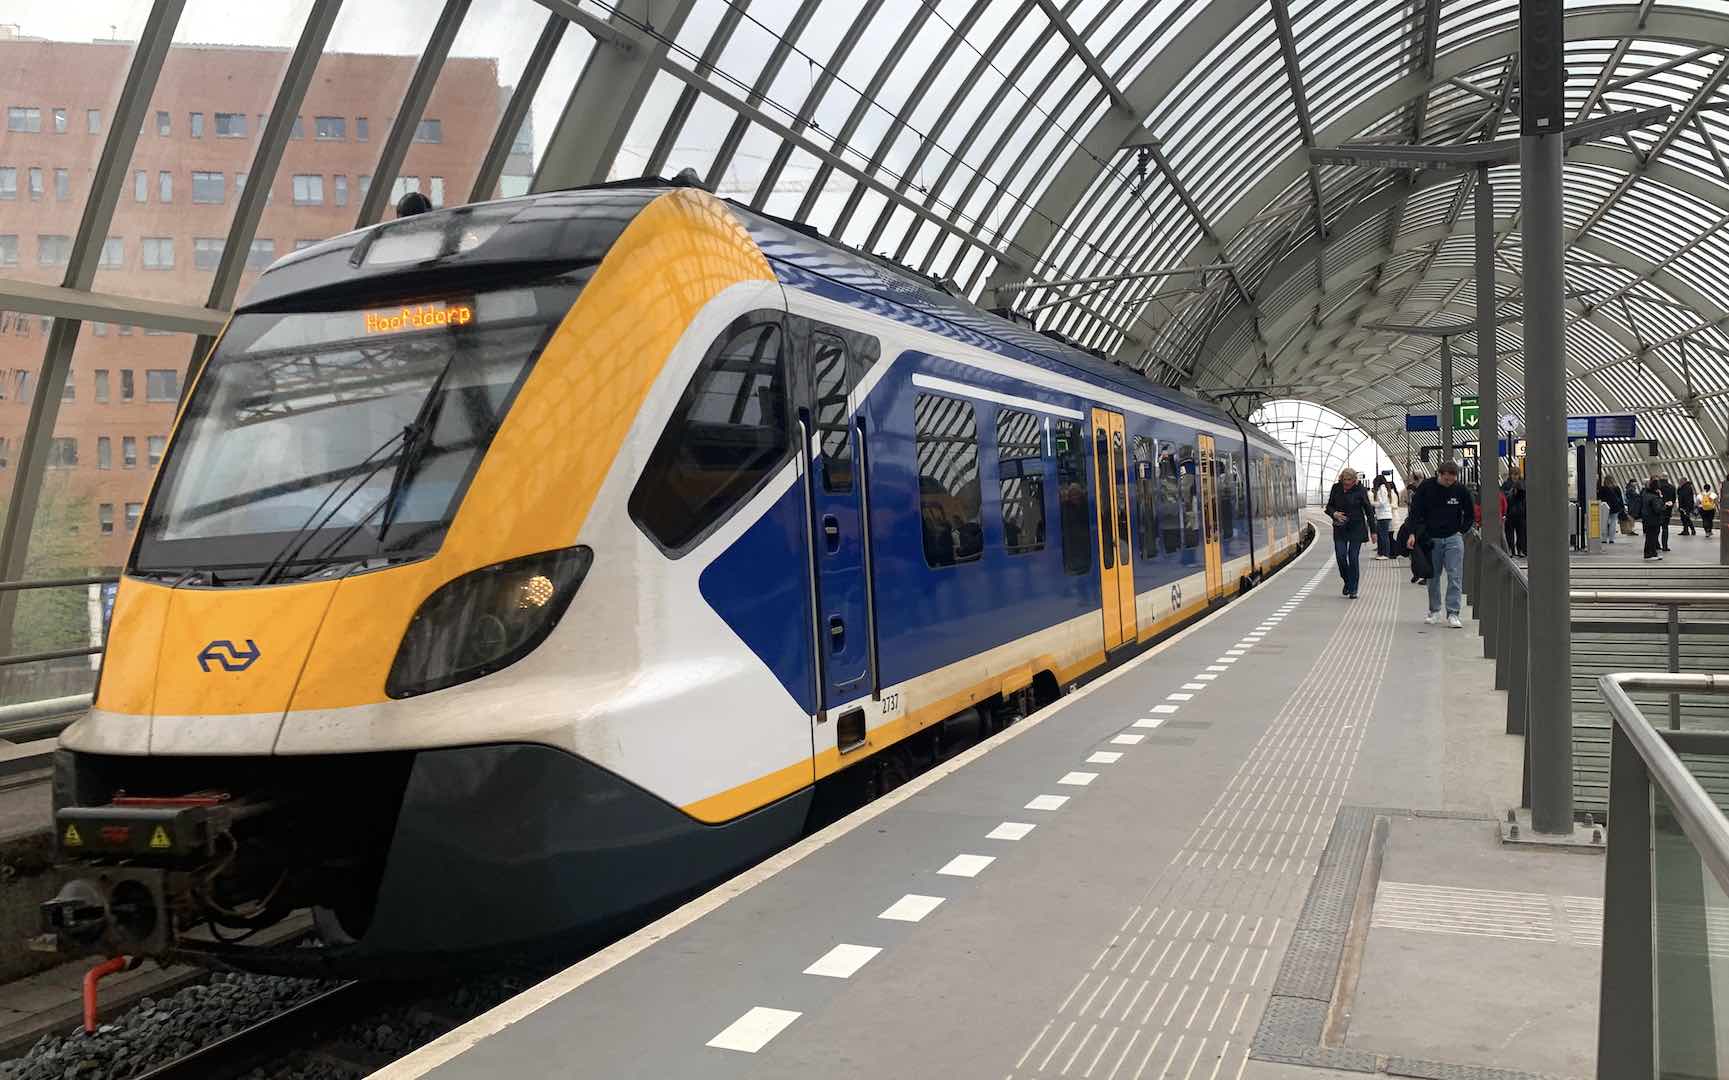 NS, Netherlands' national railway system, made for an incredibly easy to use and modern way to quickly criss-cross the country. But, it wasn't what we'd call cheap.